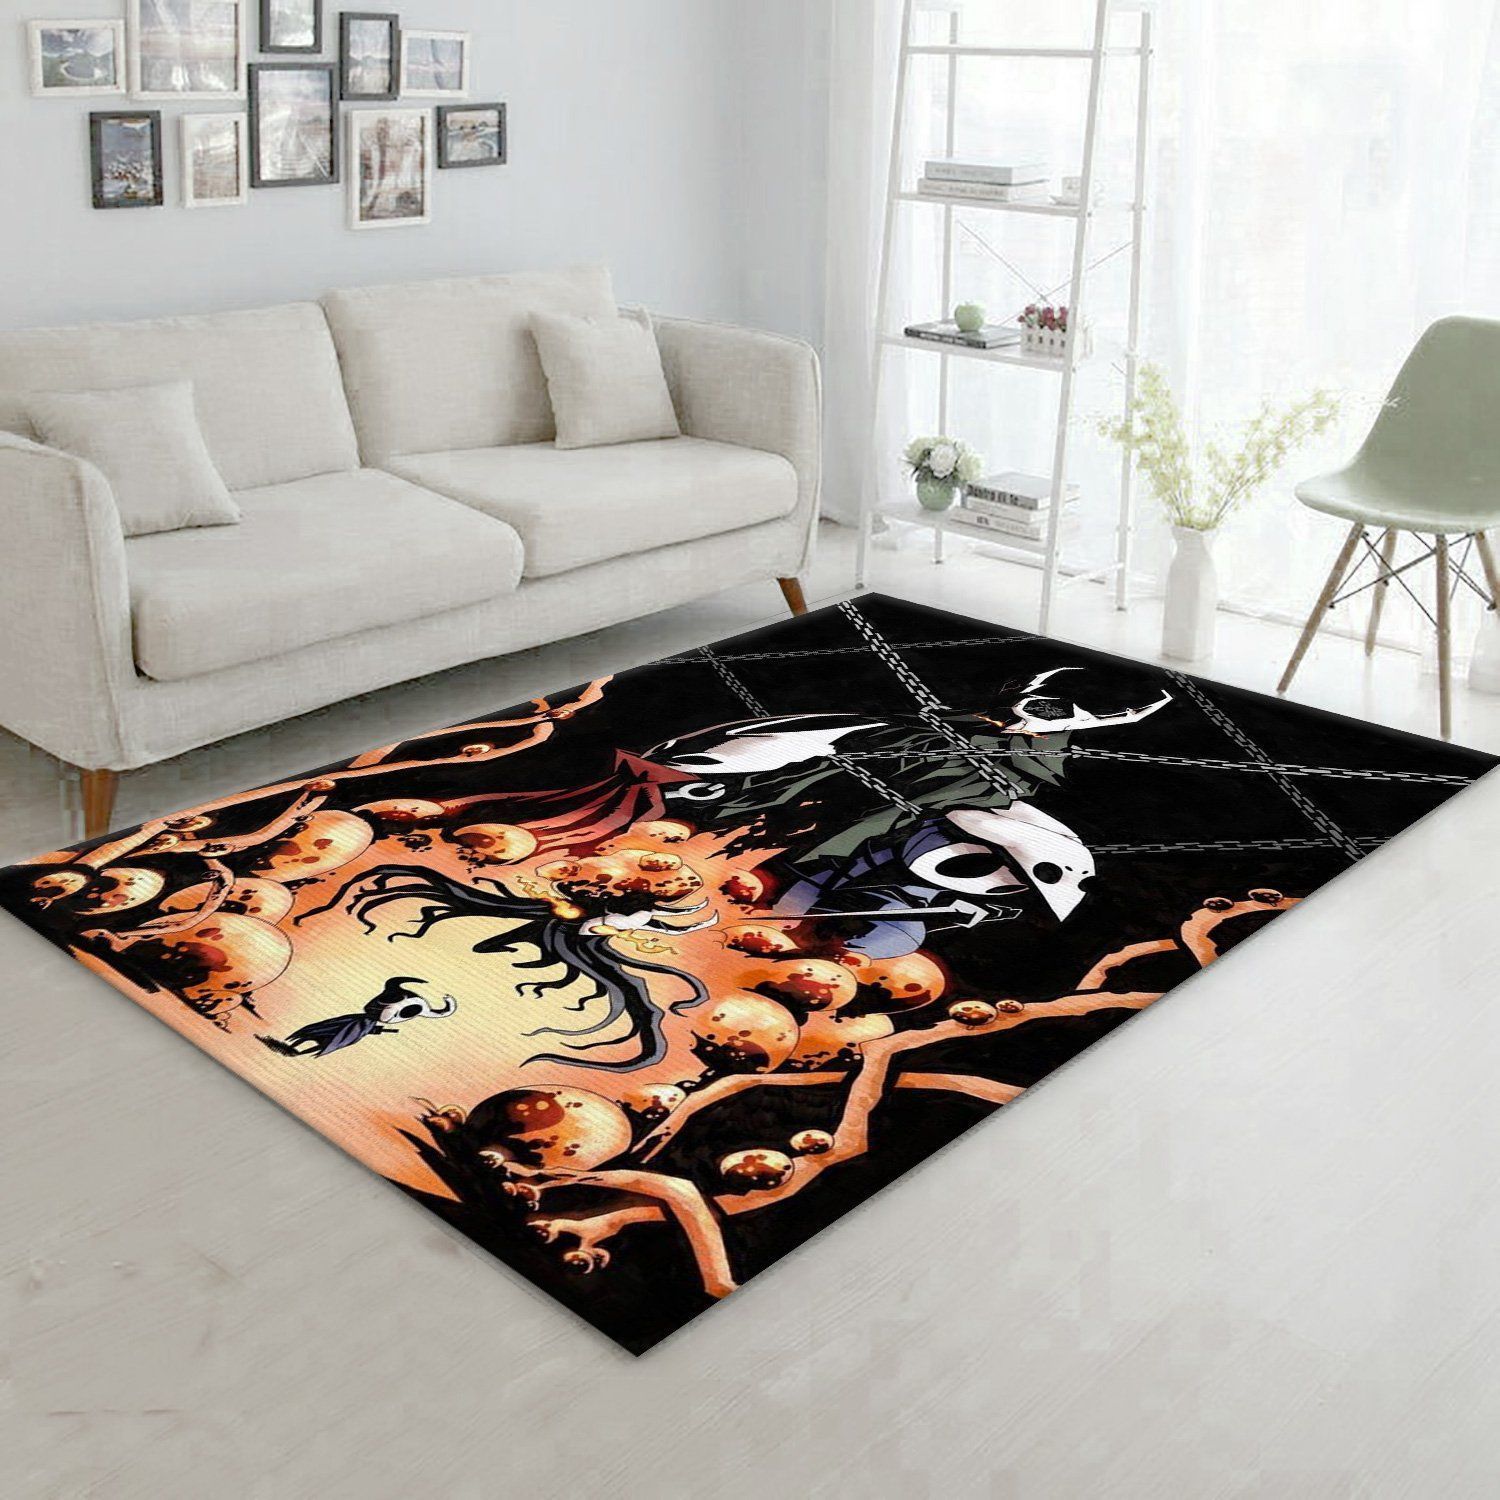 Hollow Knight Ver16 Area Rug For Christmas Living Room Rug Home Decor Floor Decor - Indoor Outdoor Rugs